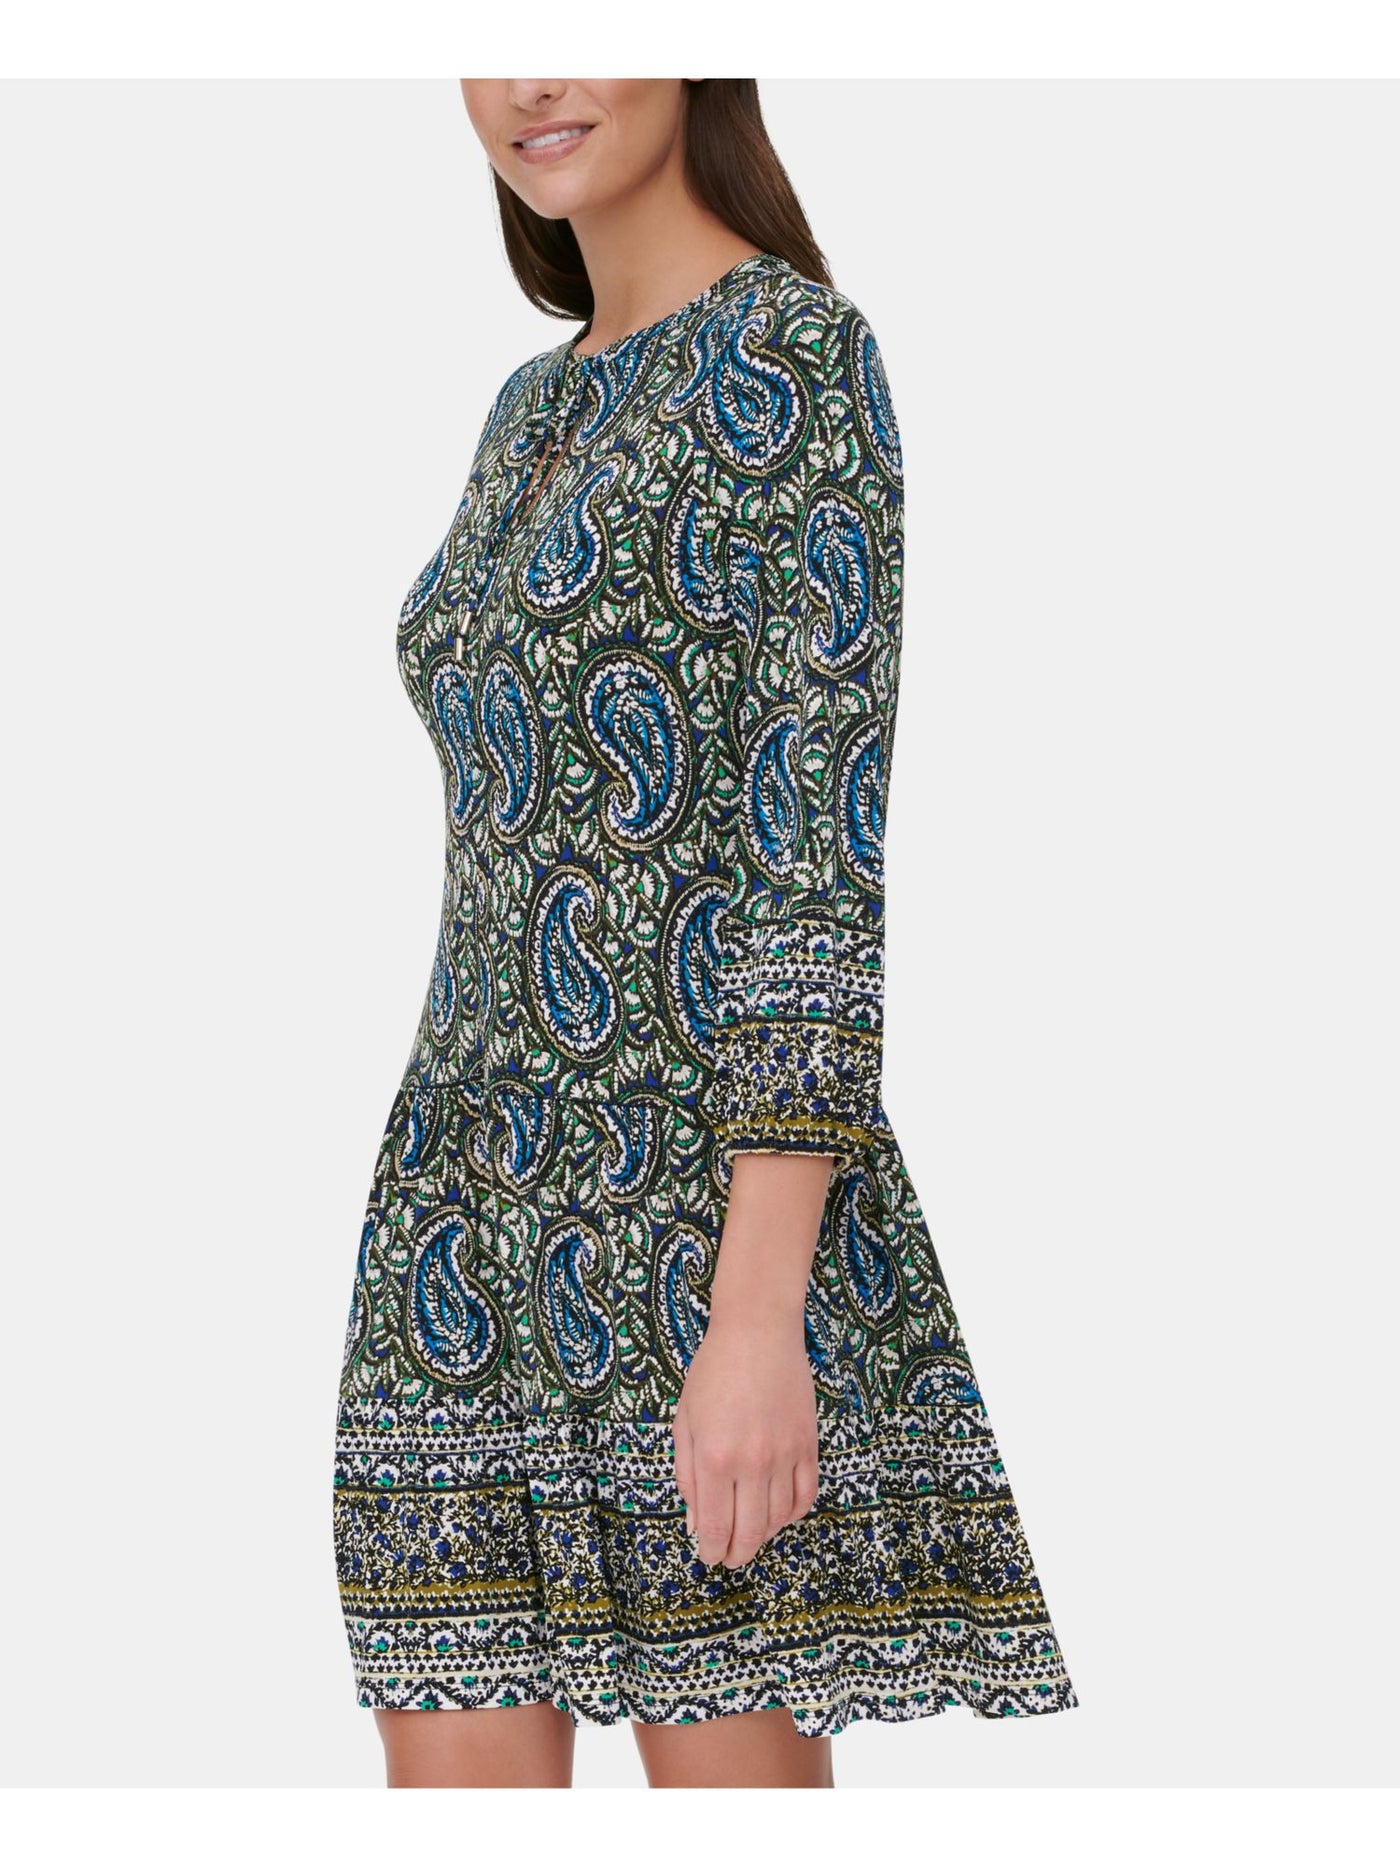 TOMMY HILFIGER Womens Green Stretch Paisley 3/4 Sleeve Tie Neck Above The Knee Wear To Work Shift Dress 10